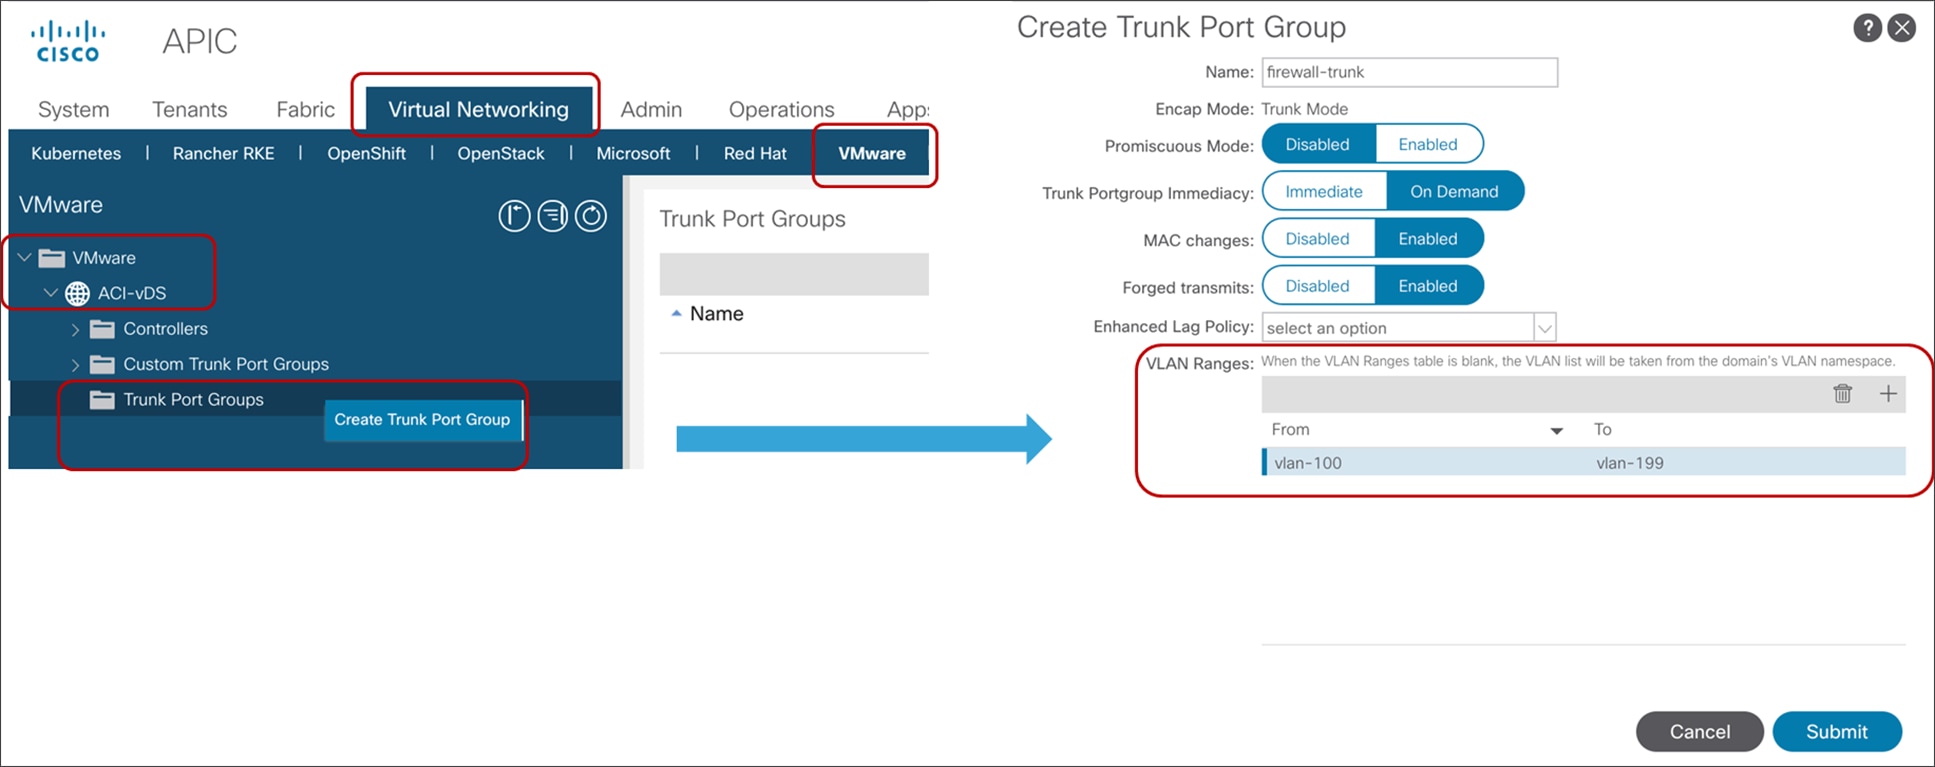 Virtual appliance configuration with trunk port group